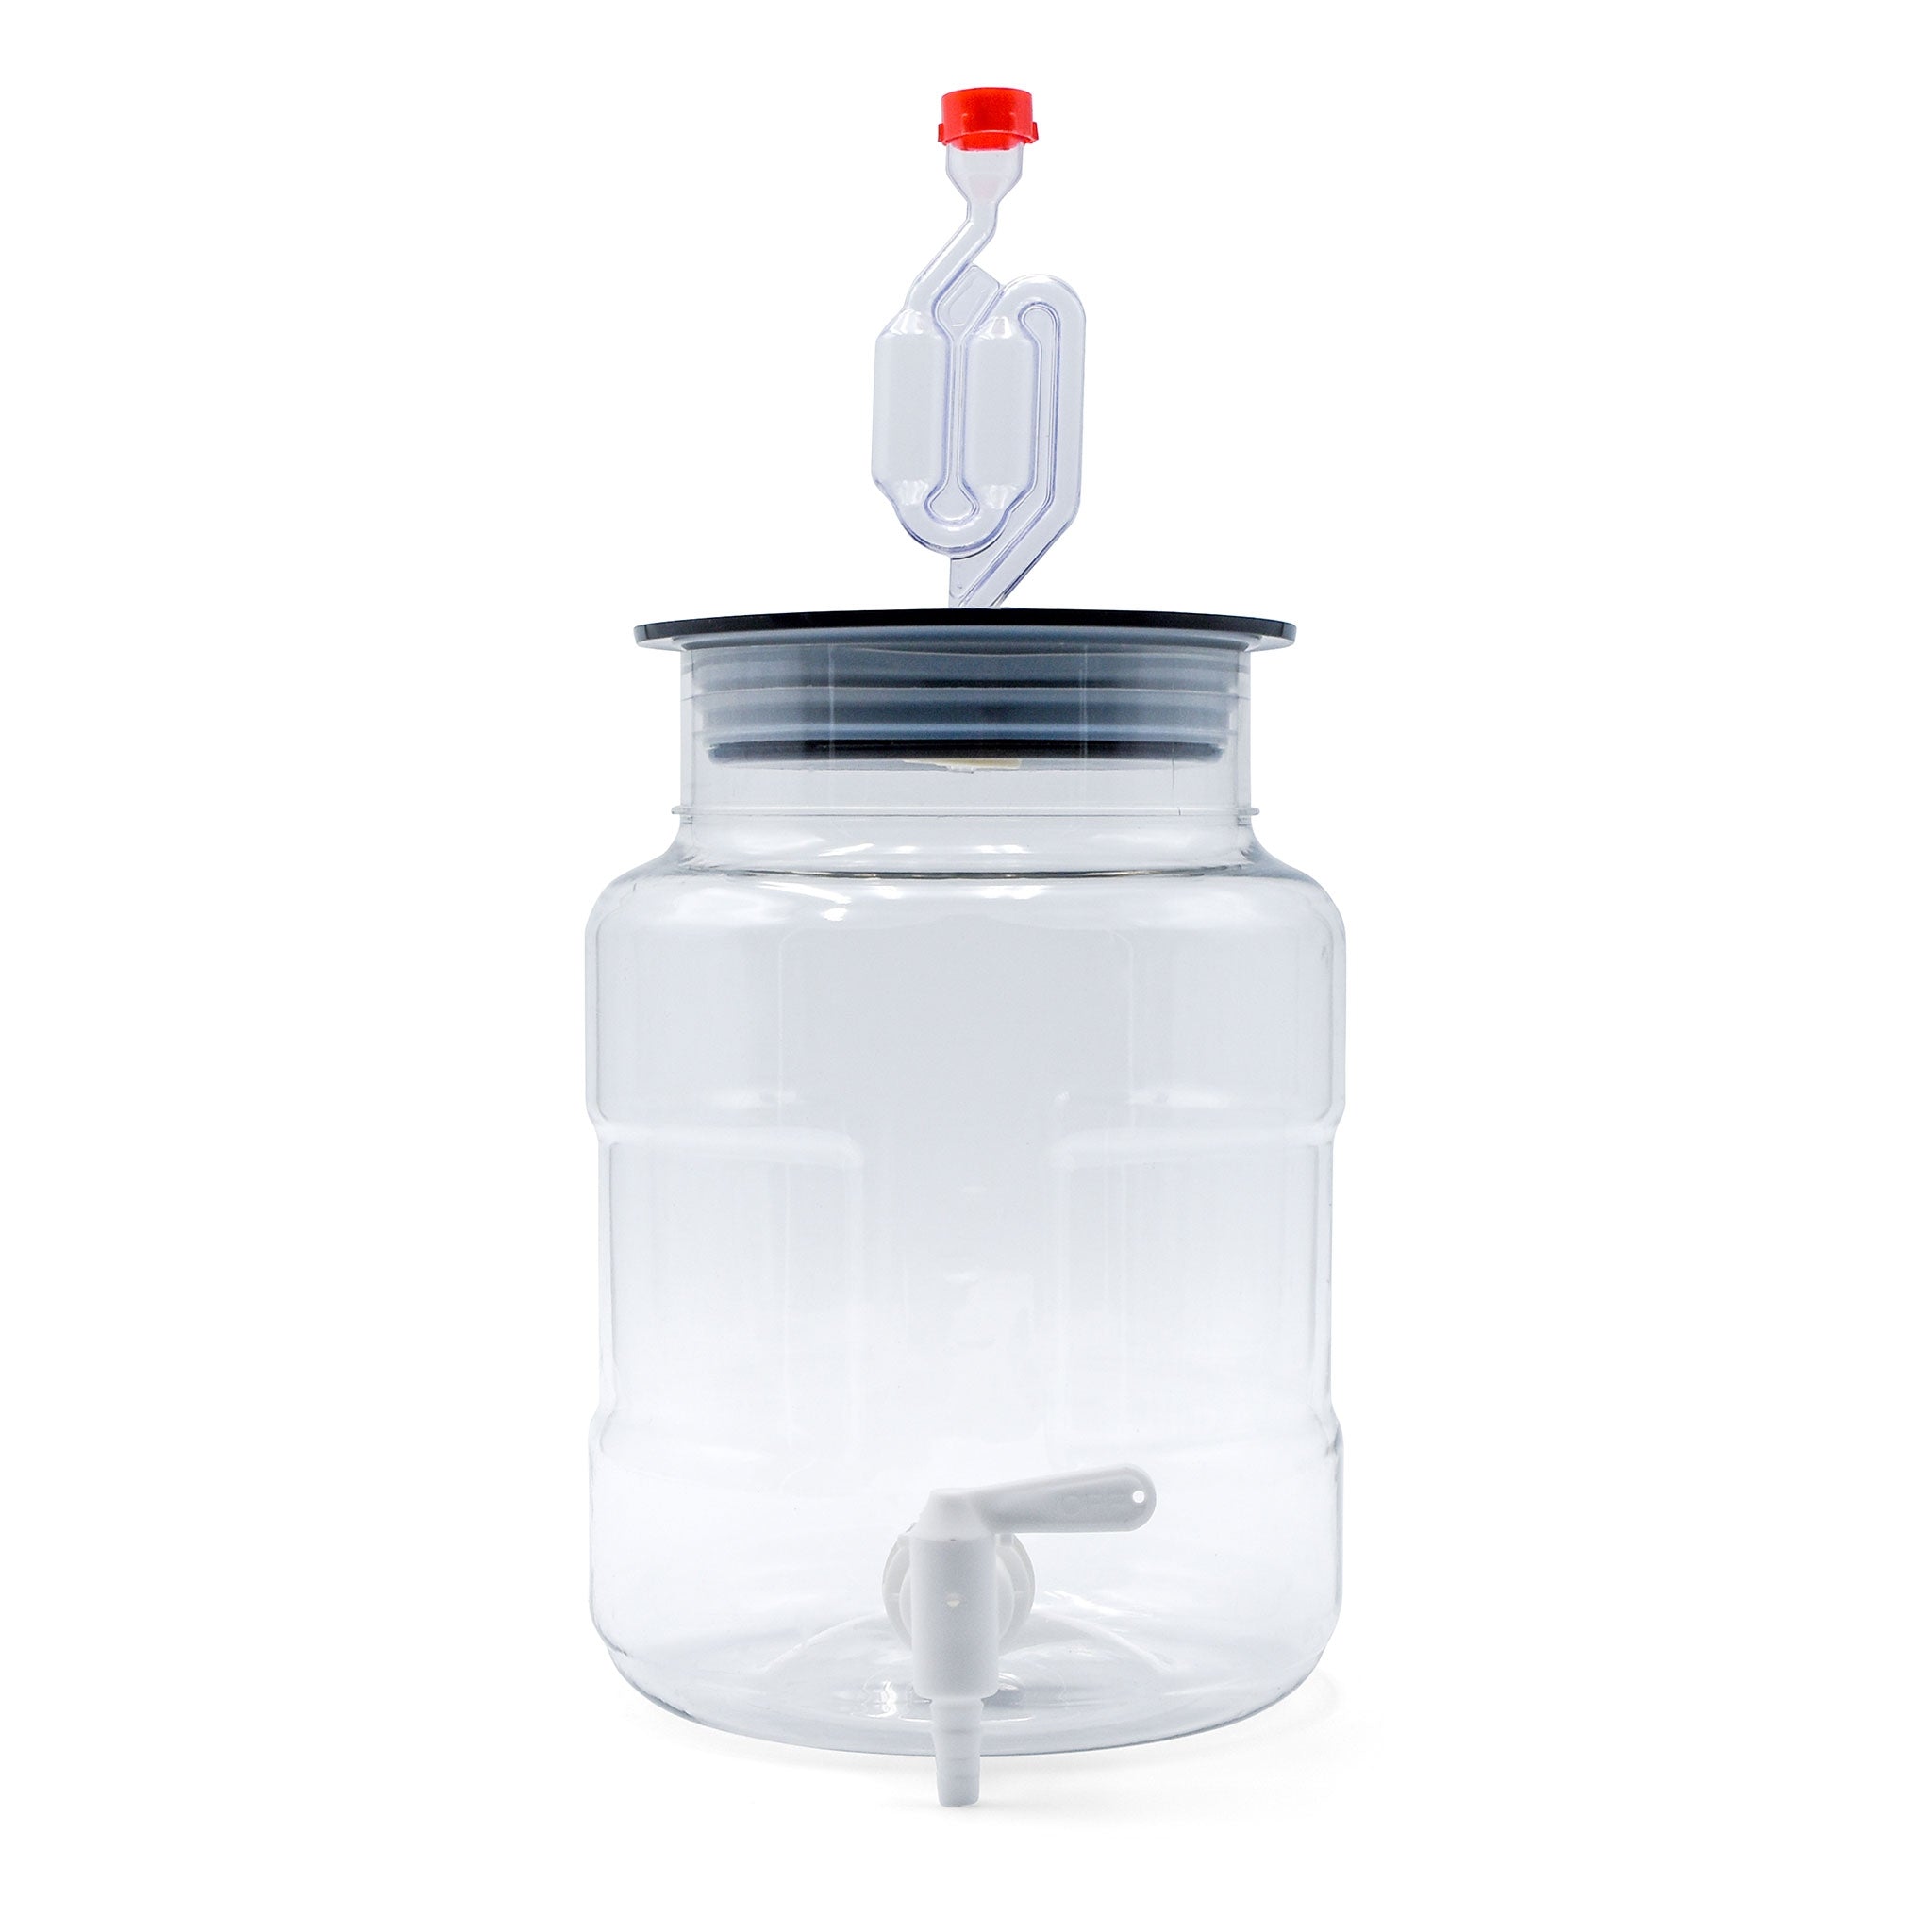 Image of Siphonless Plastic Fermenter with Bung and Airlock